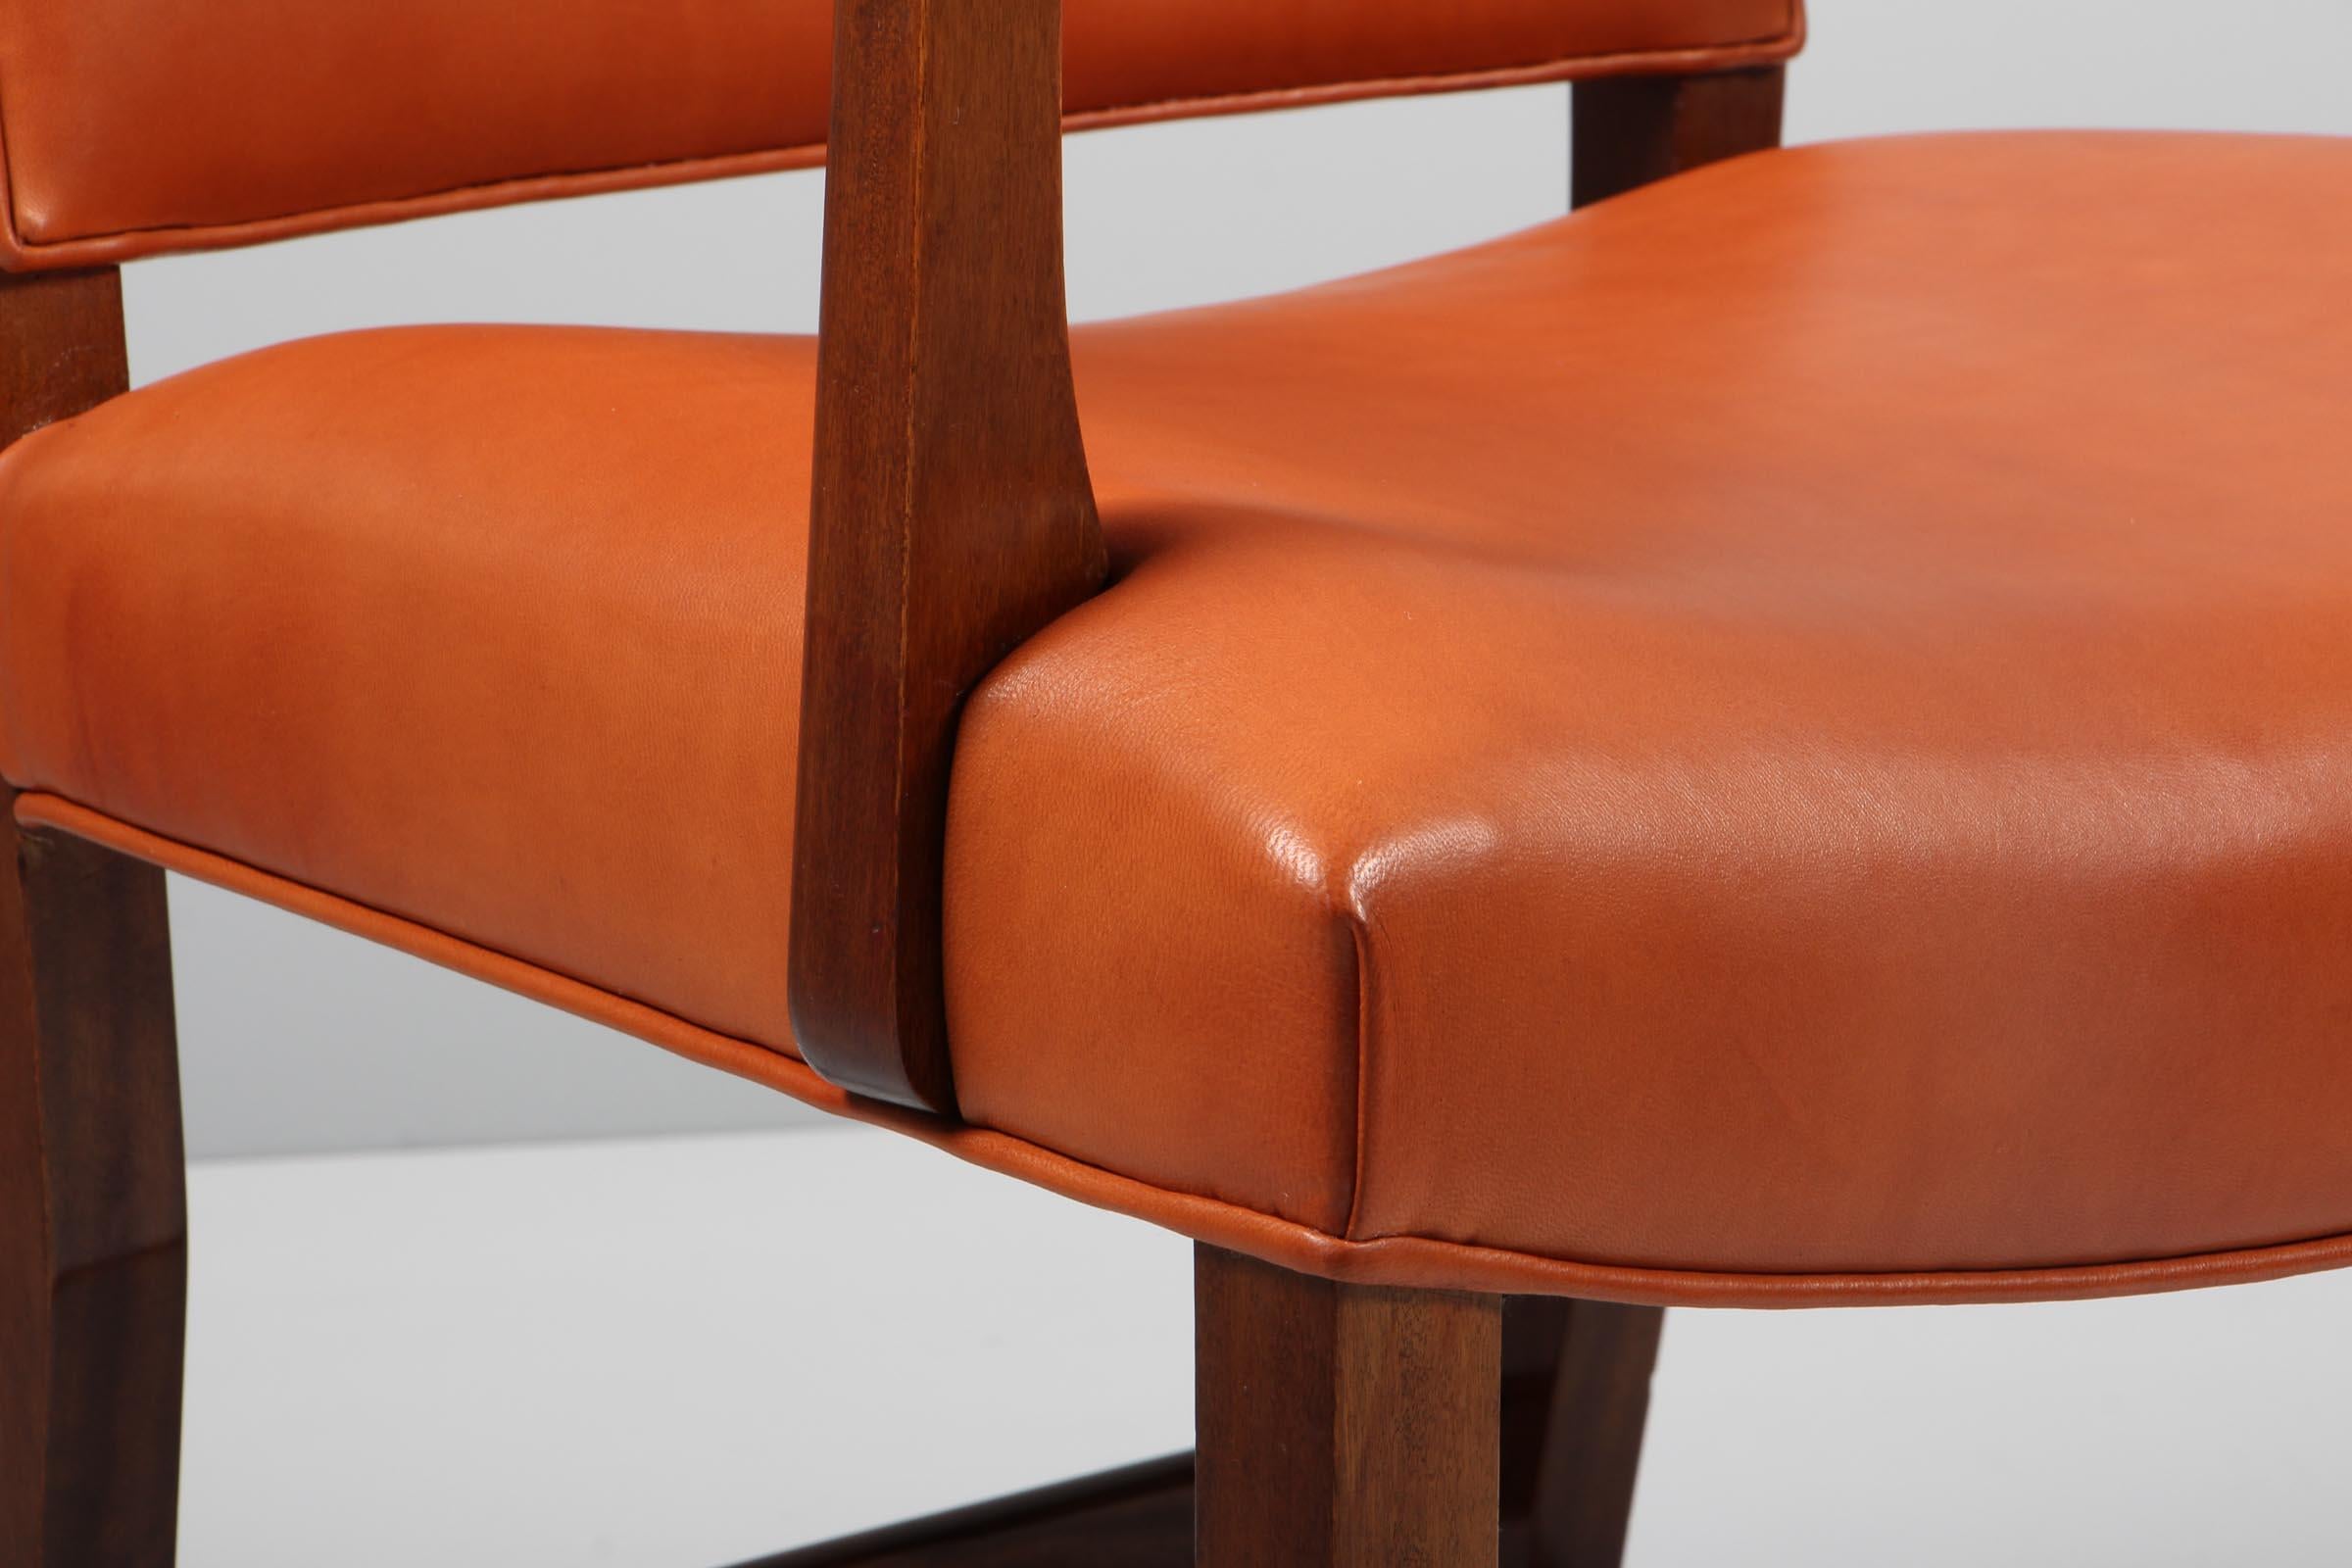 Danish Red Chair by Kaare Klint for Rud Rasmussen, Mahogany and Goat Leather